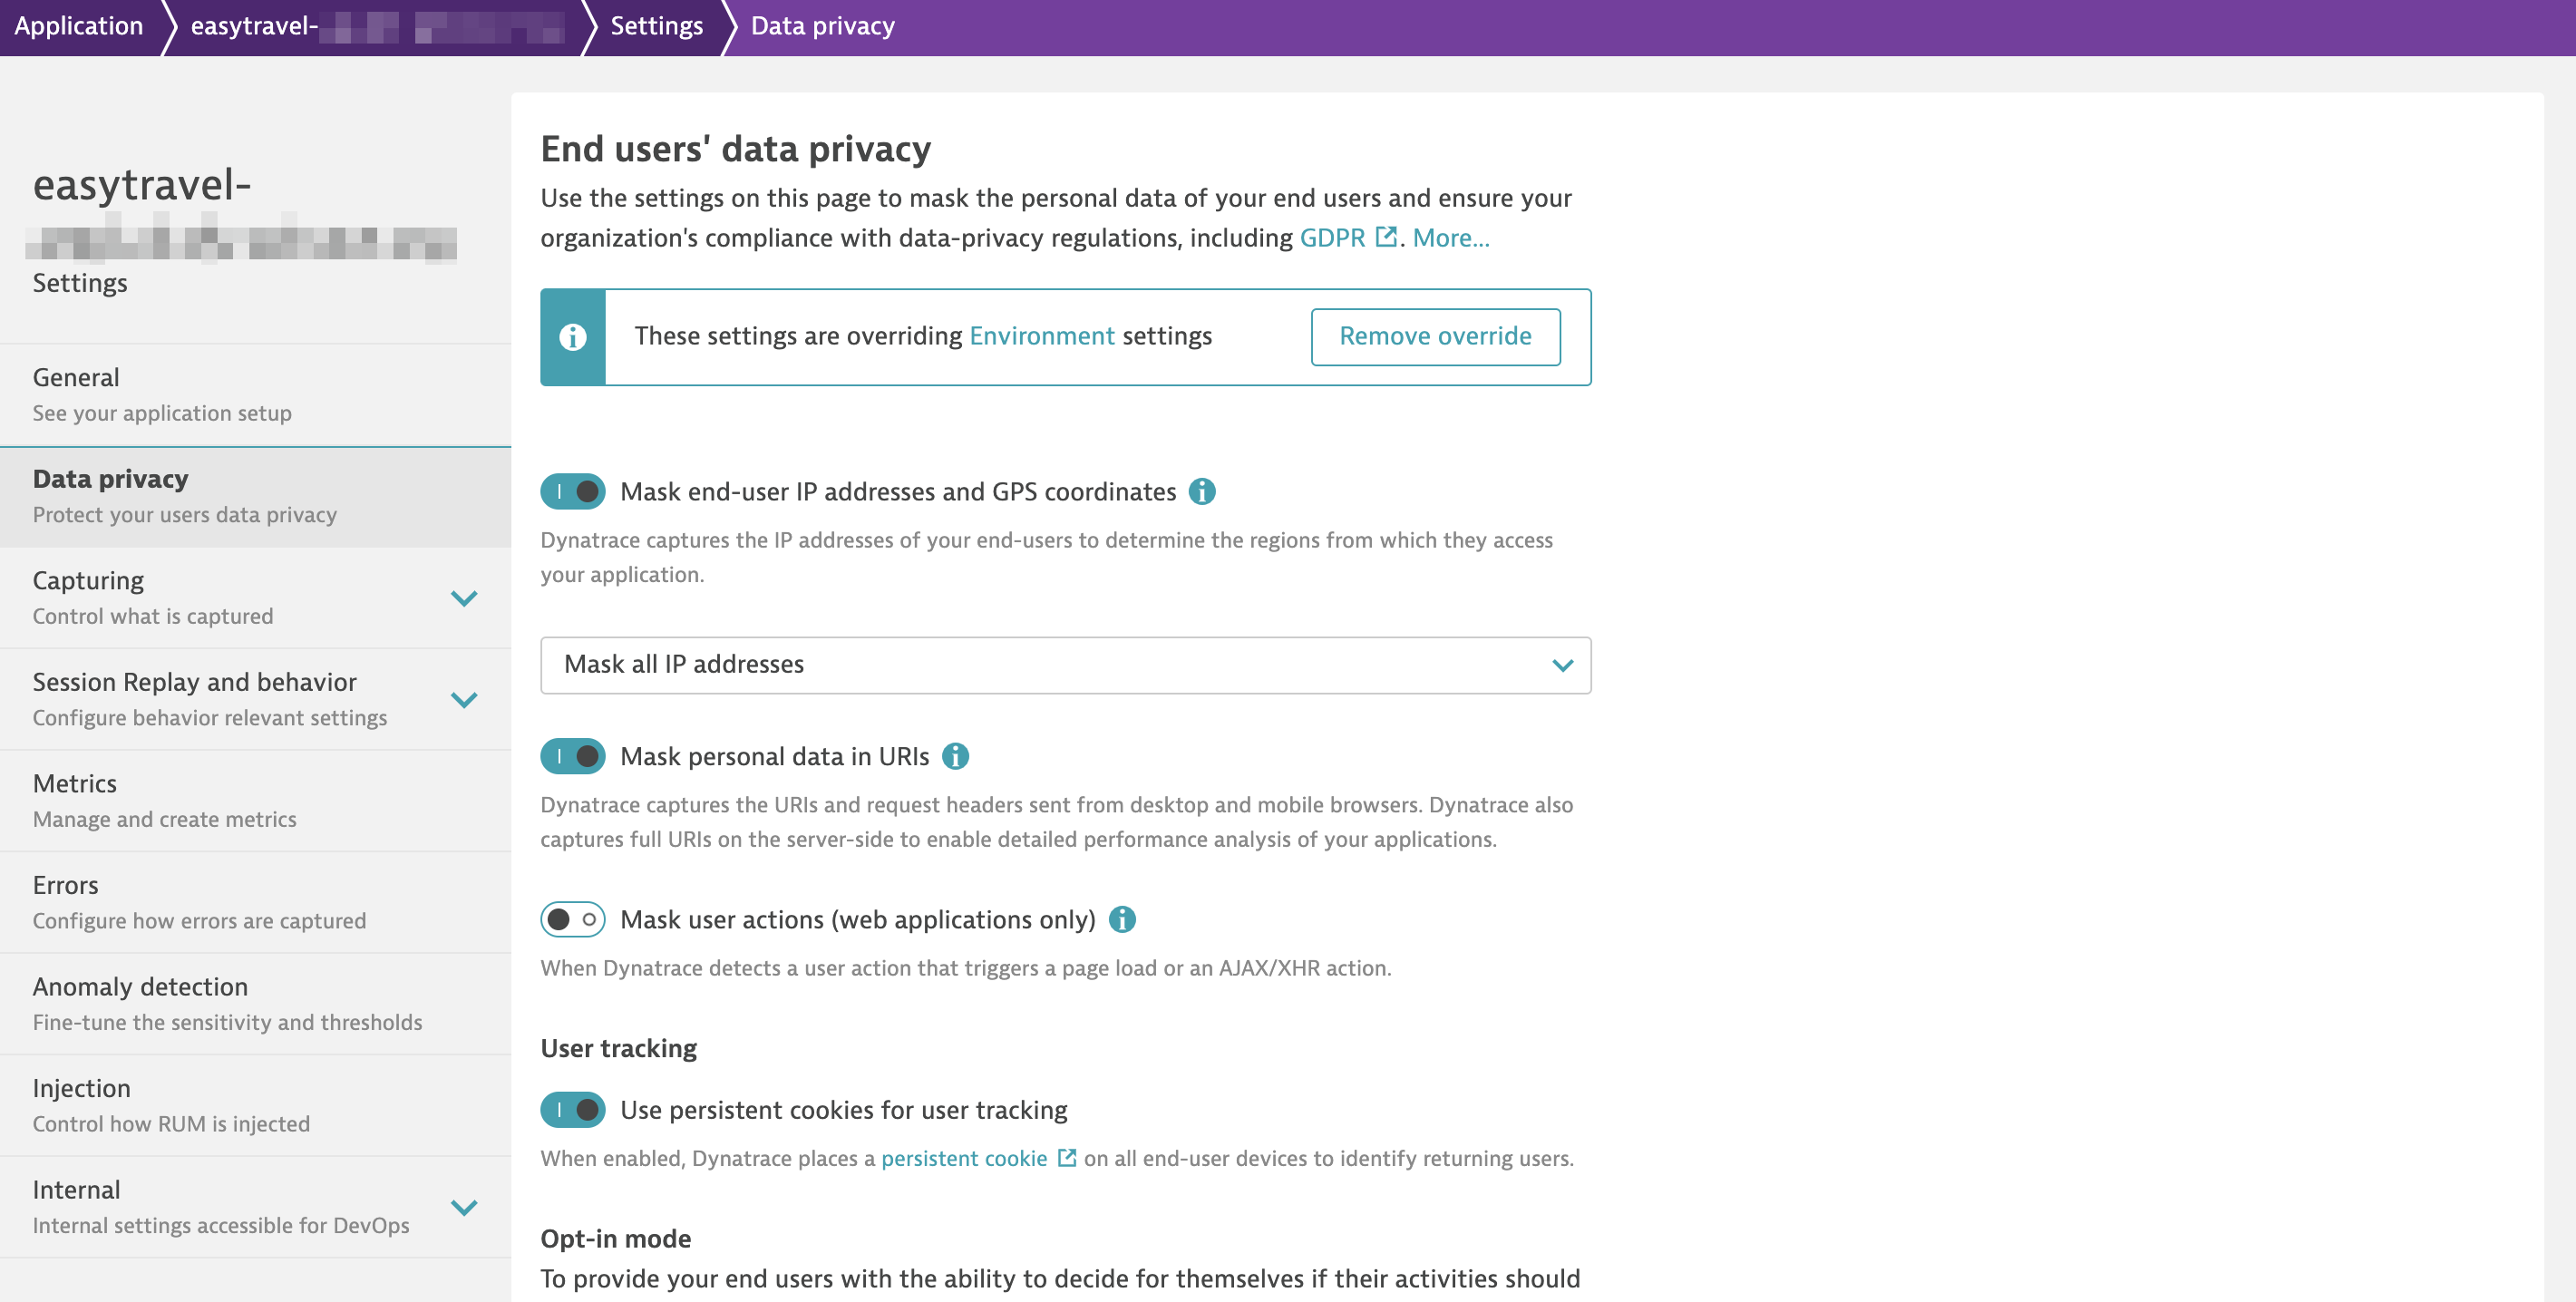 Application privacy settings override environment-level settings